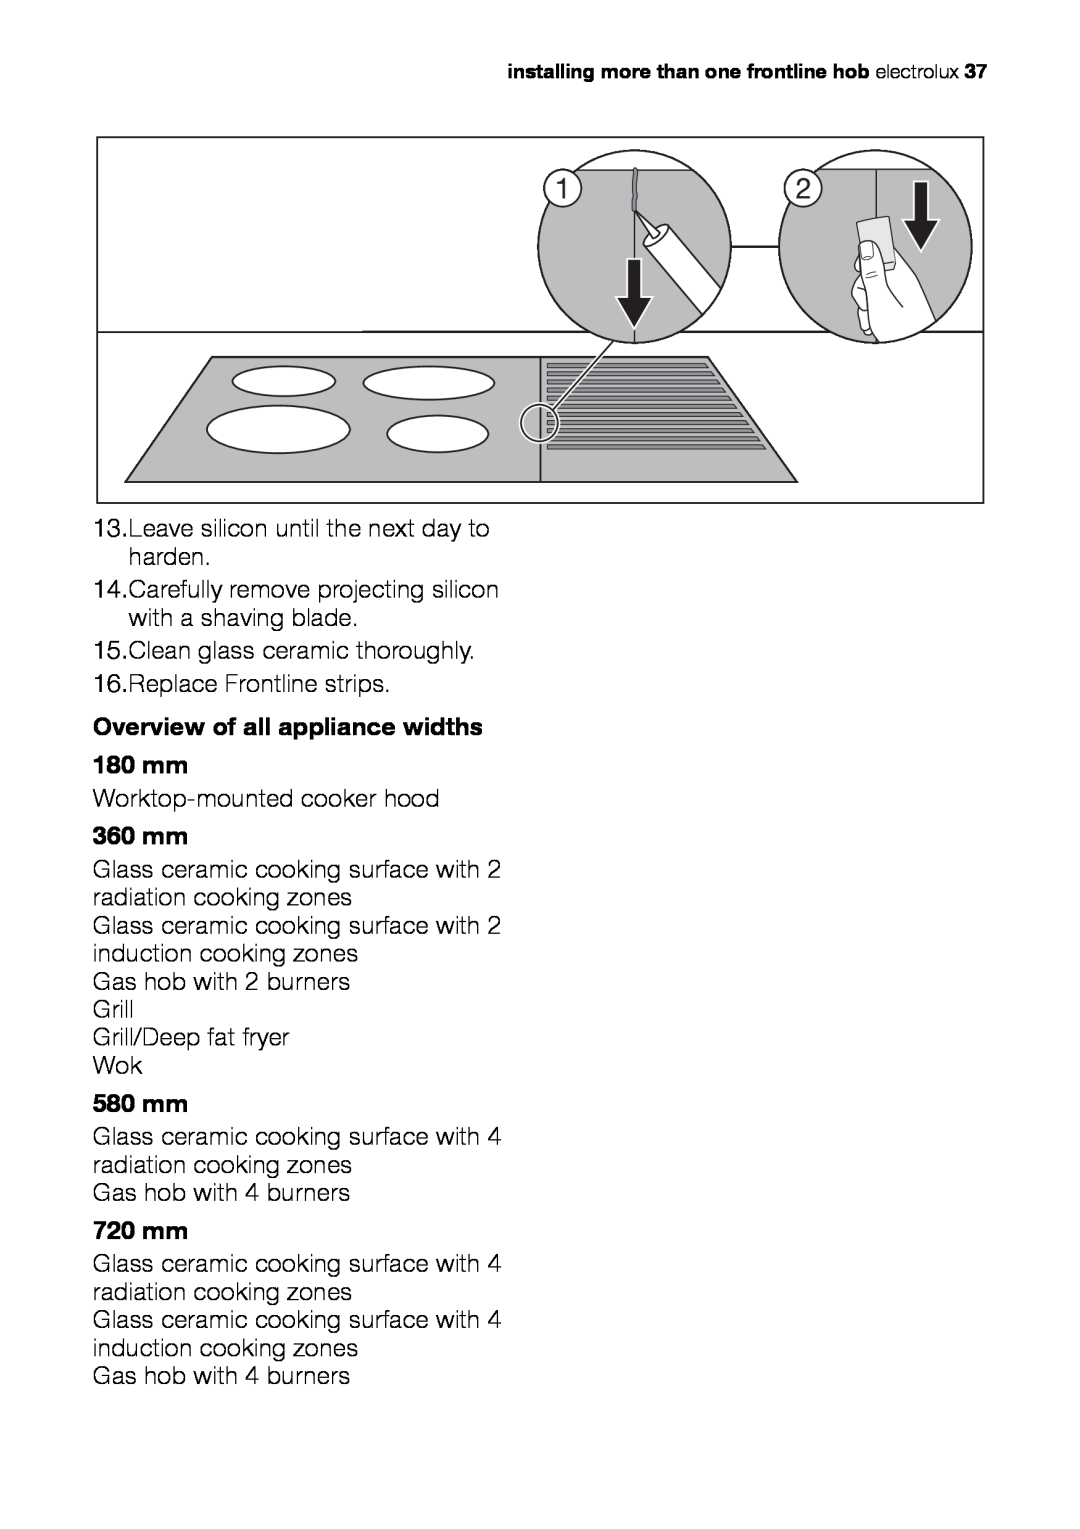 Electrolux EHS 36020 U user manual Overview of all appliance widths 180 mm, 360 mm, 580 mm, 720 mm 